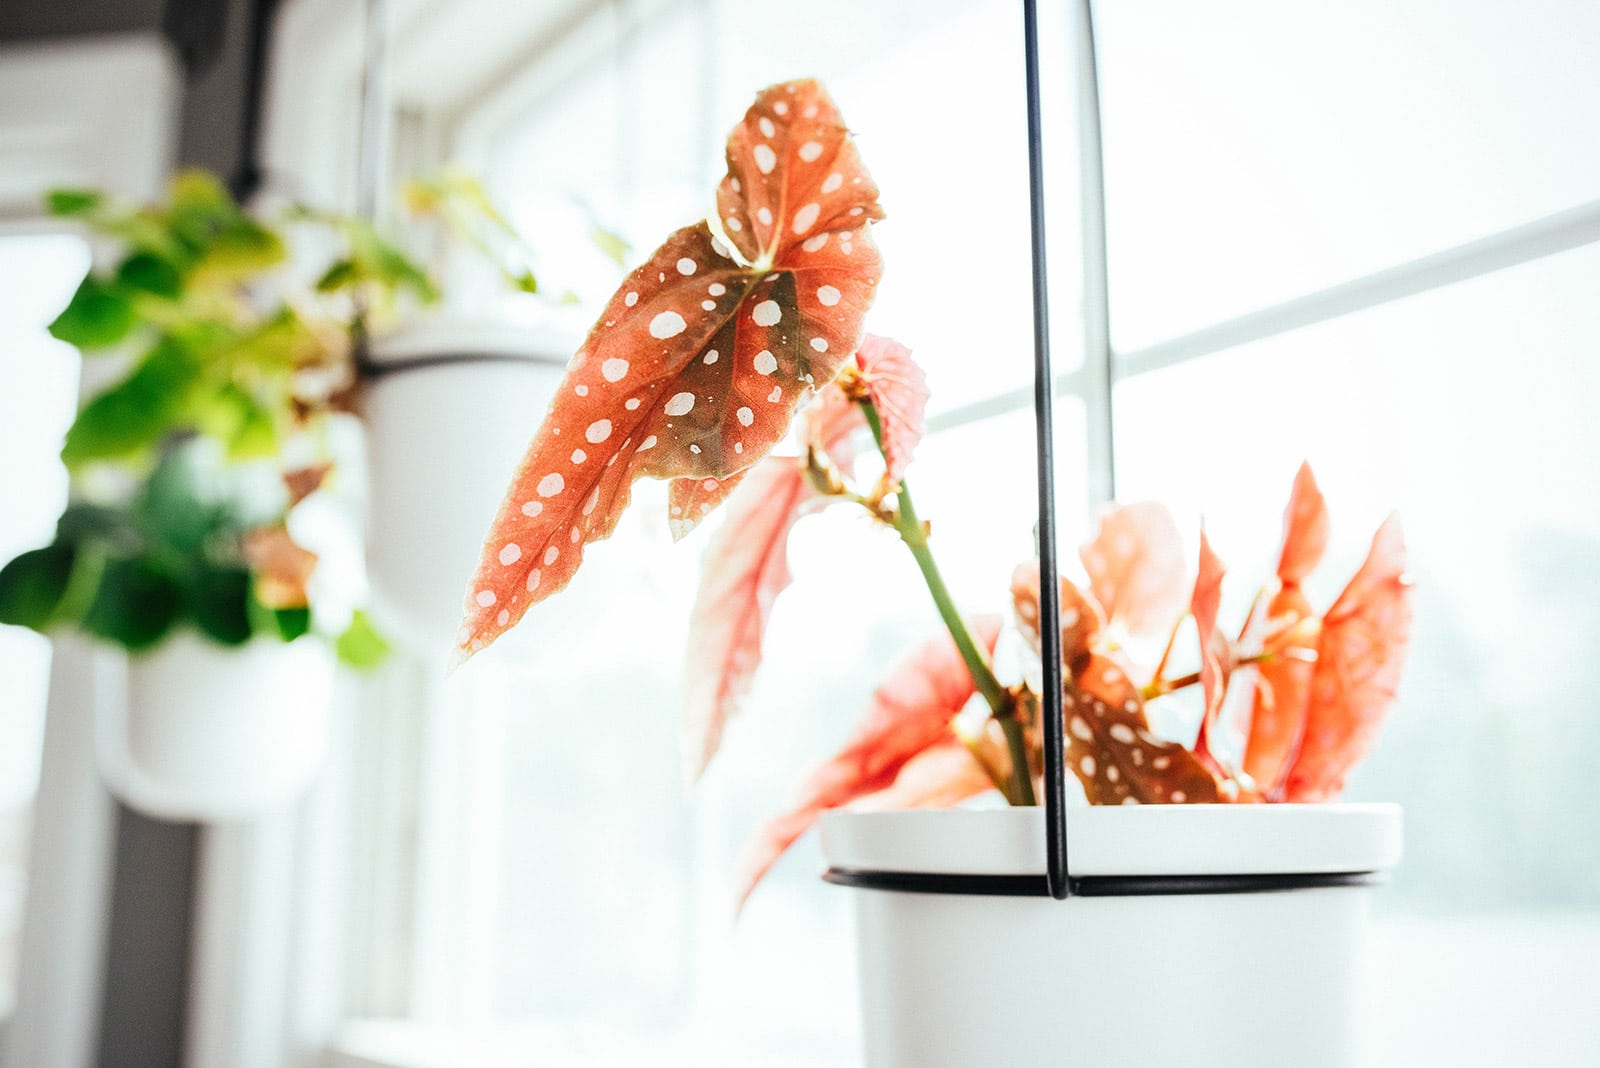 PInk spotted Begonia maculata plant in a white pot hanging in front of a window